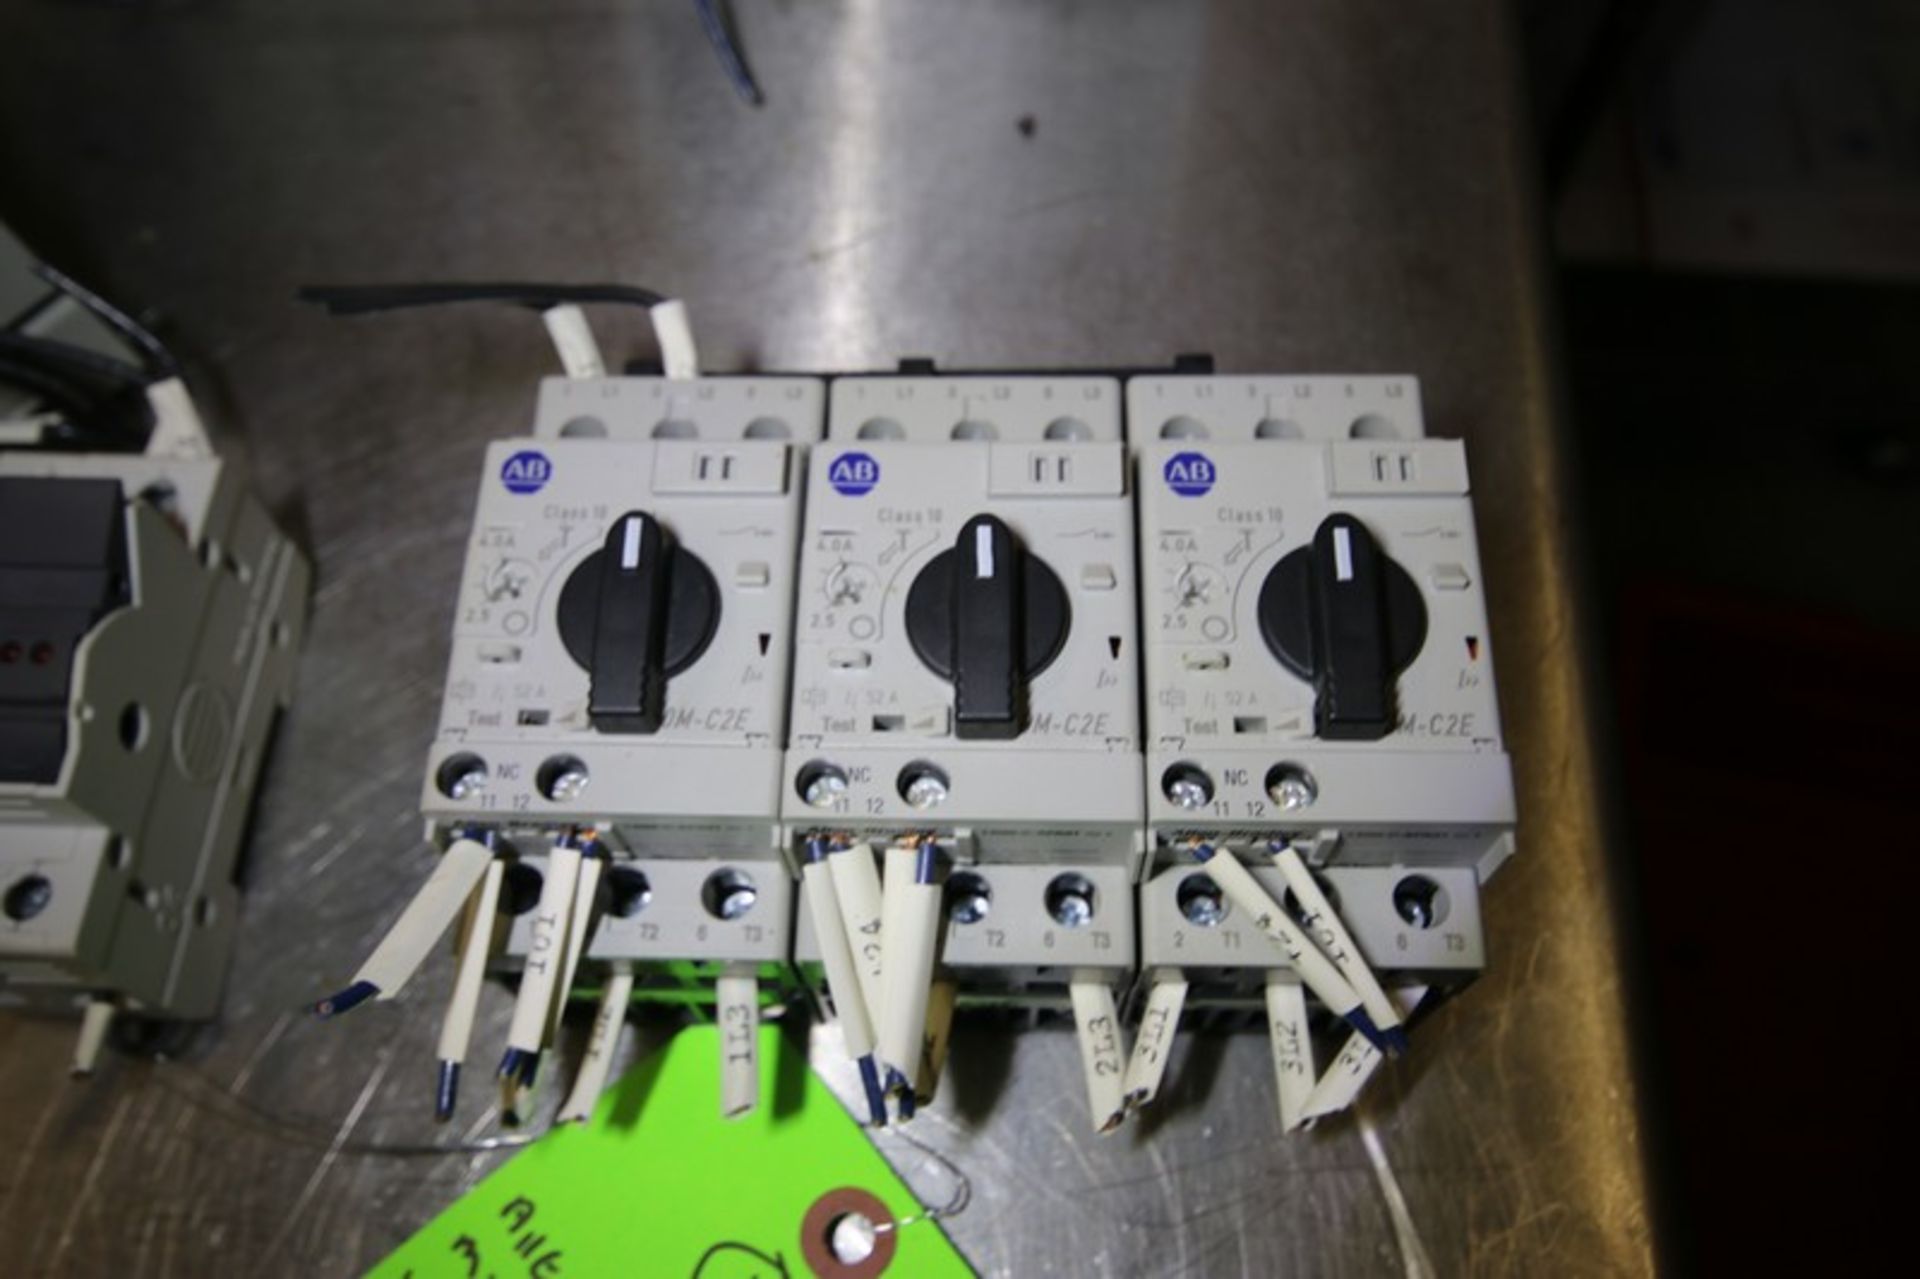 Production Control Panel Electrical Includes Allen Bradley Micrologix 1000 PLC Controller - Cat. No. - Image 10 of 11